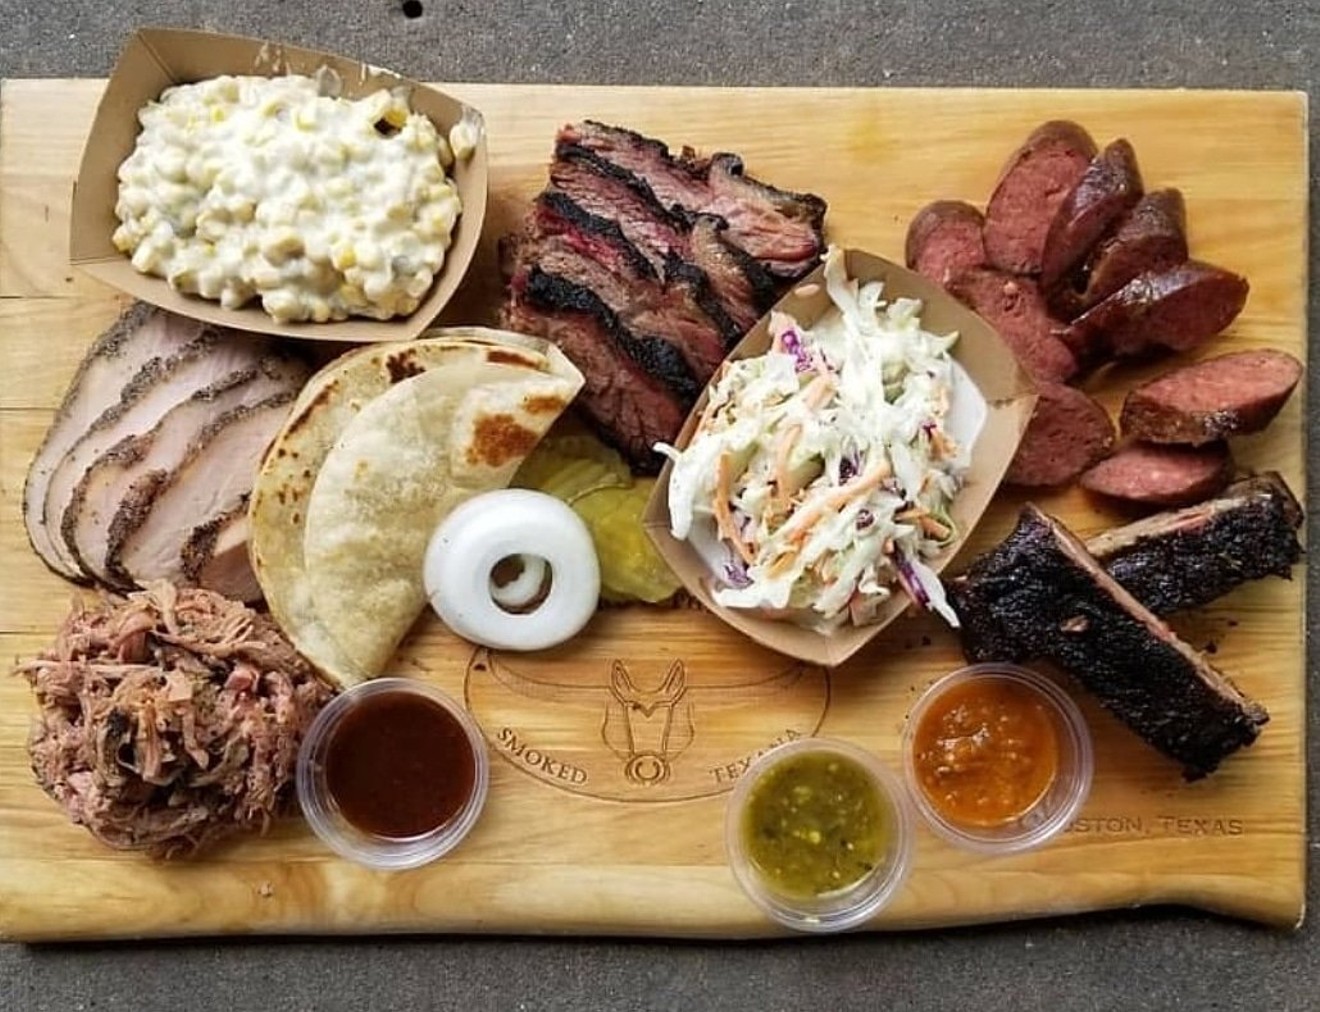 The parillada platters allow diners to go hog wild with choices.